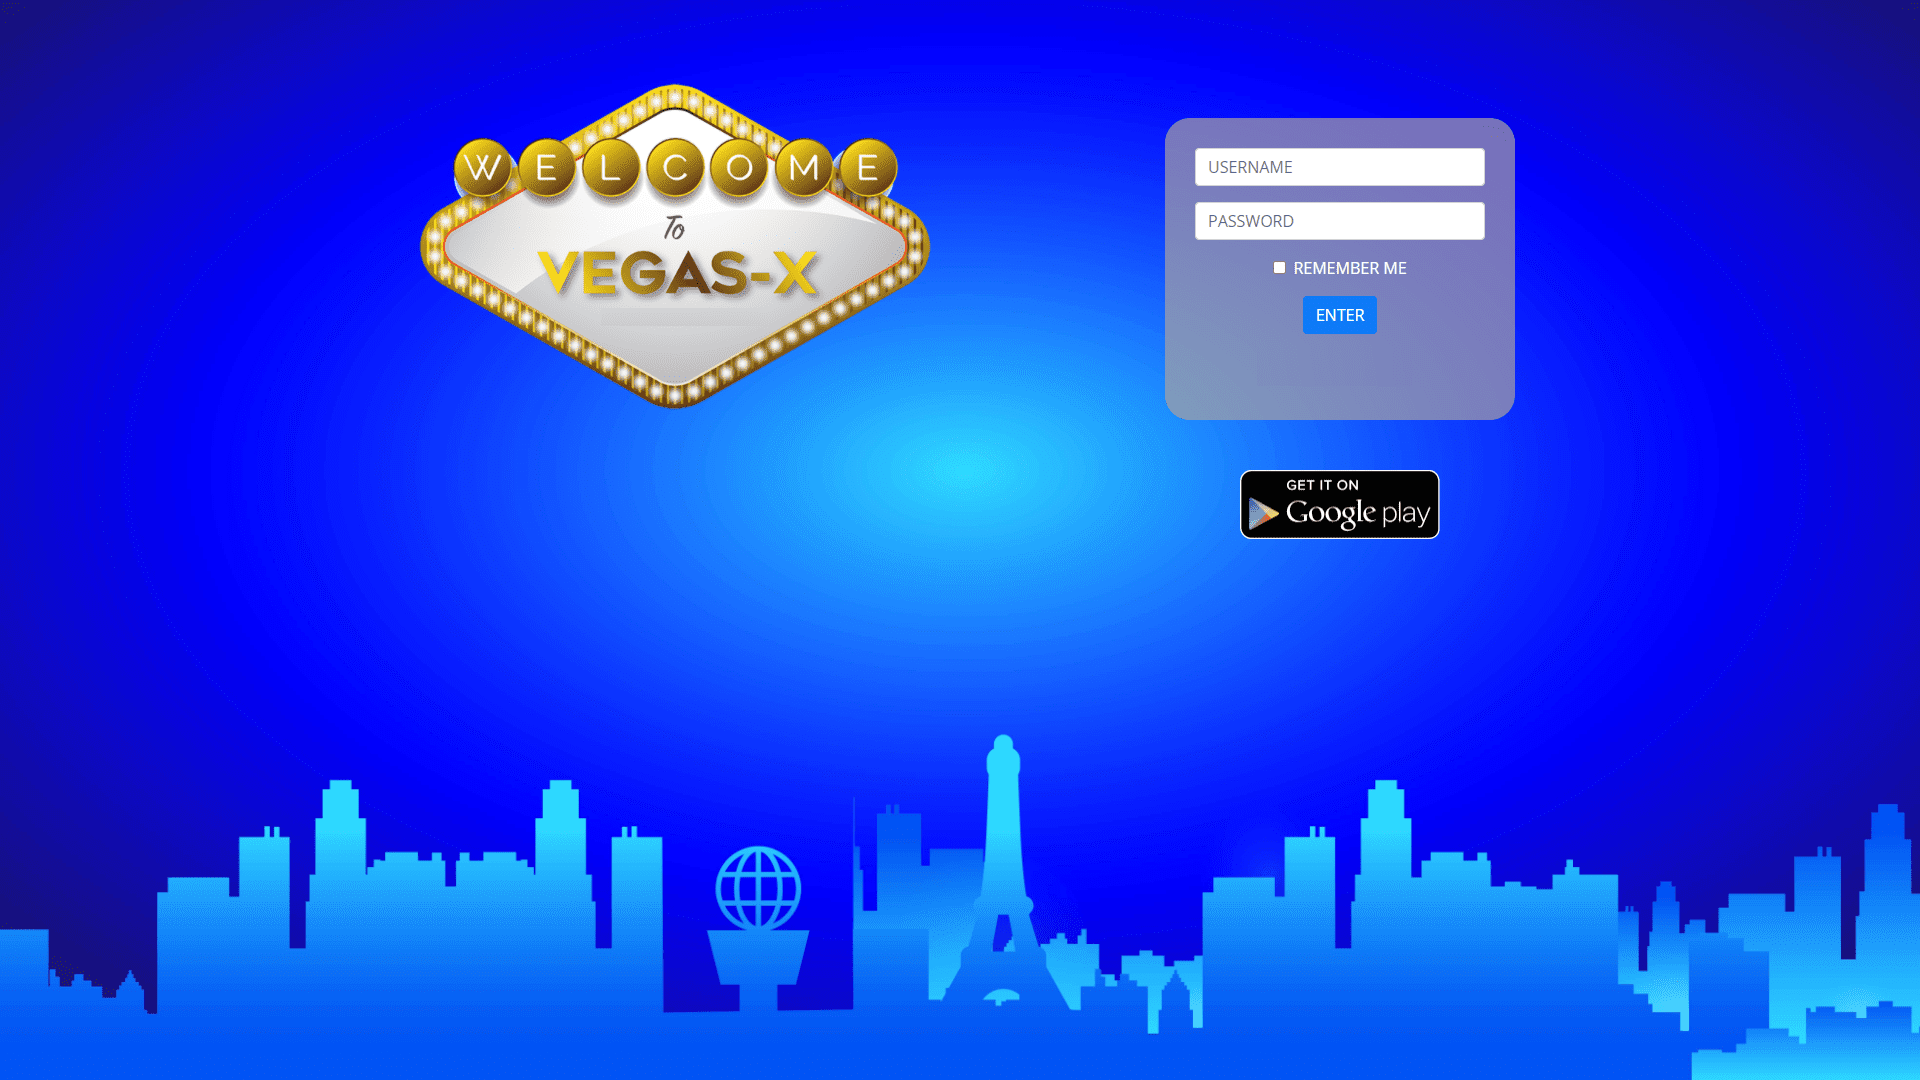 Vegas Image 5.0.0.0 download the new